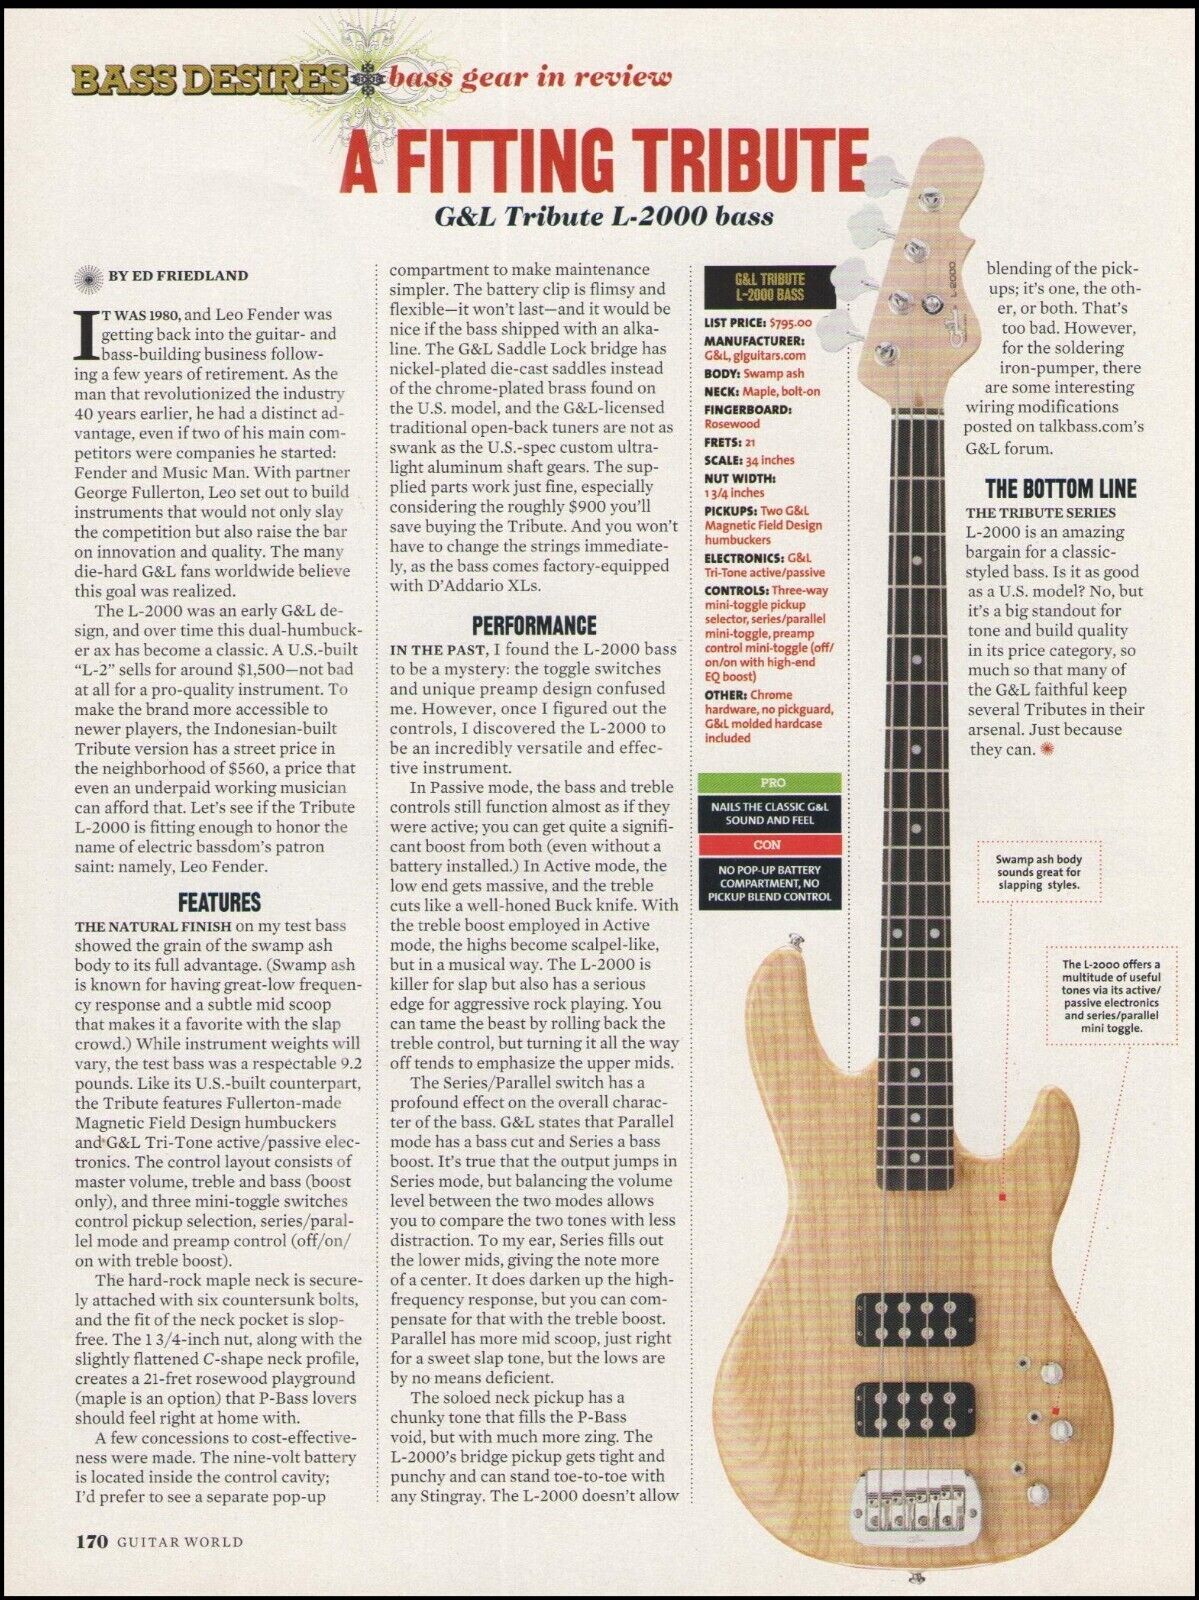 G&L Tribute L-2000 bass guitar review sound check article